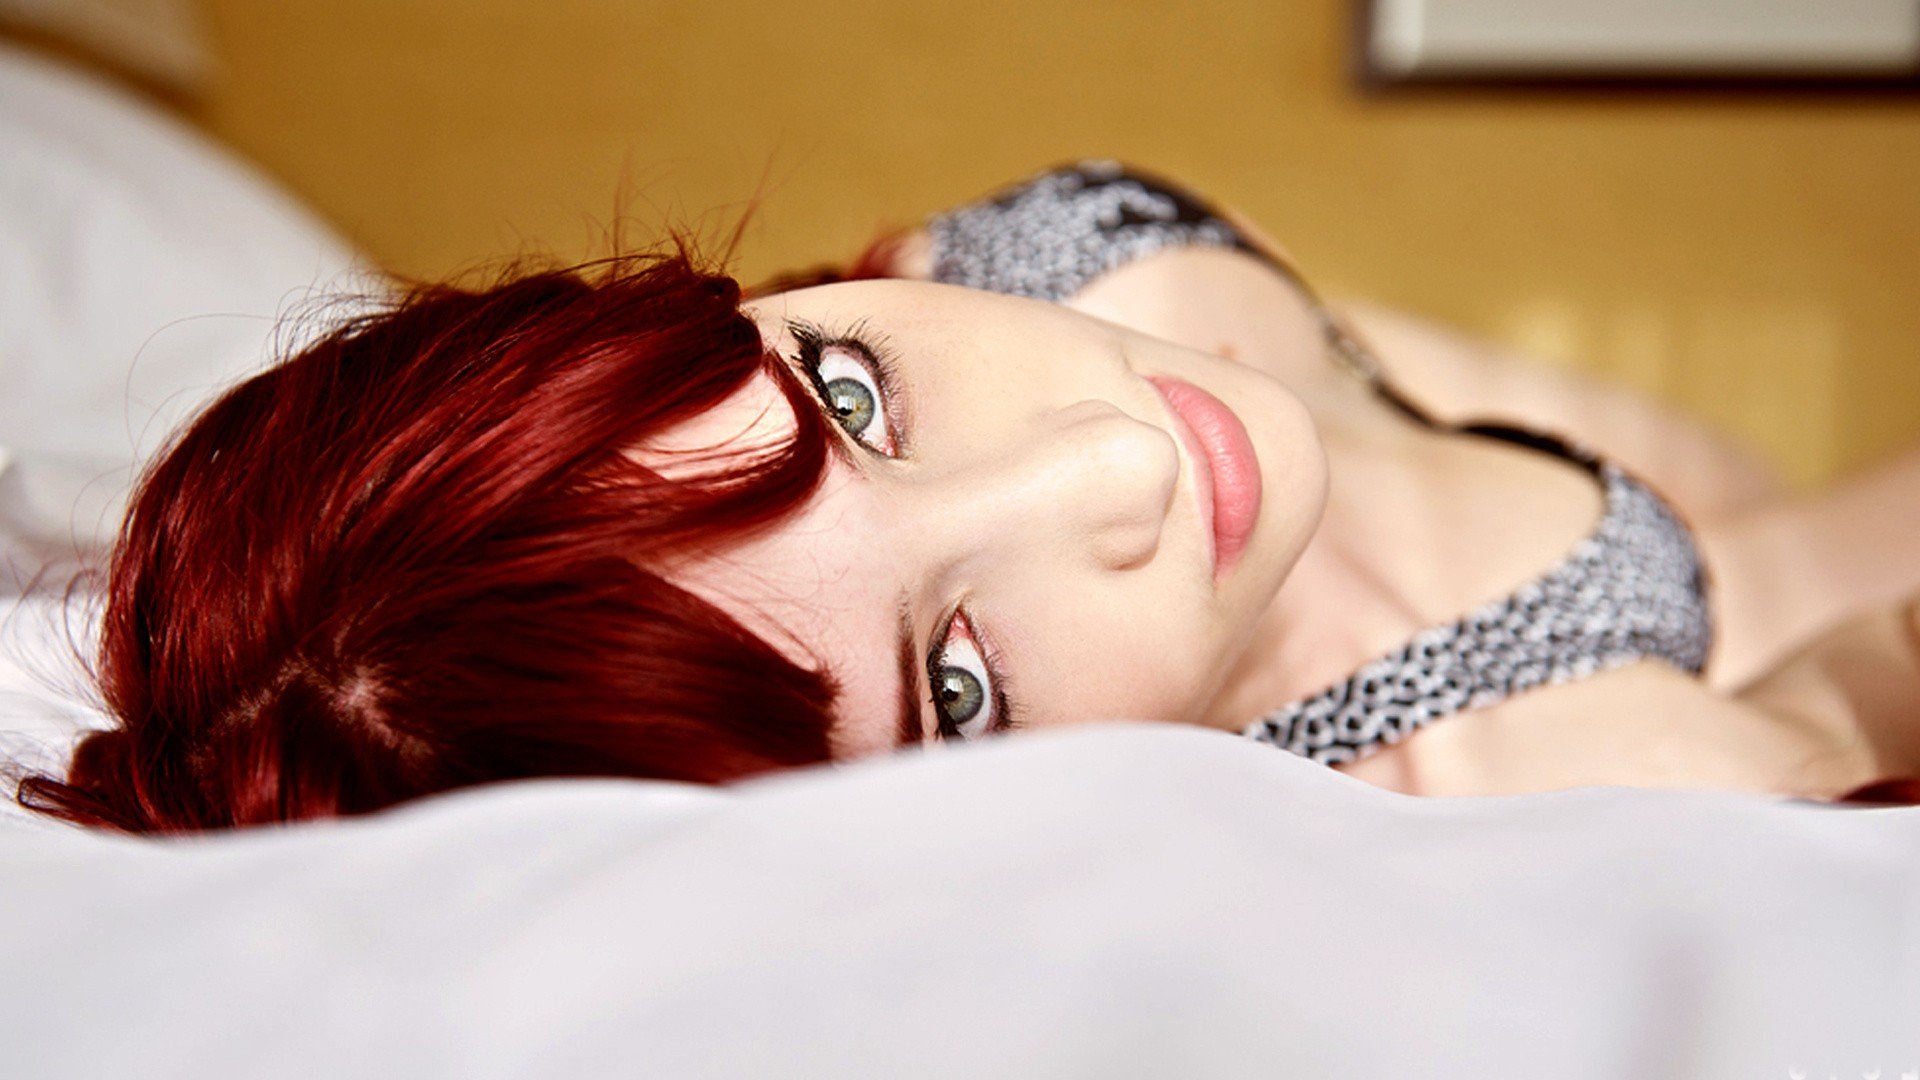 Cute Redhead Girl Puts On A Bedroom